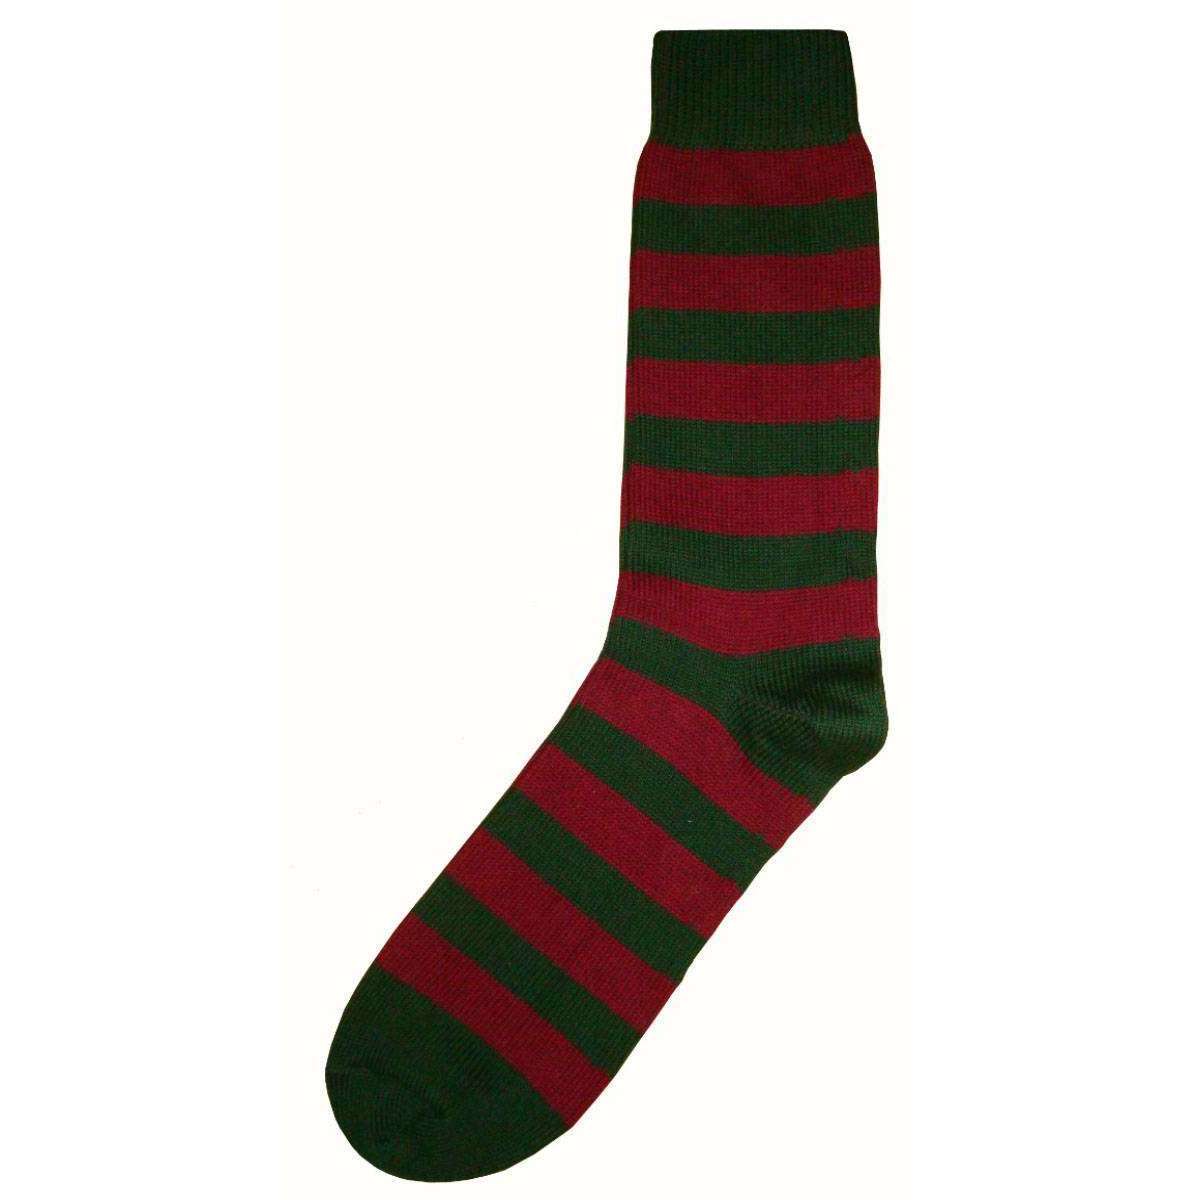 Bassin and Brown Striped Midcalf Socks - Wine/Green